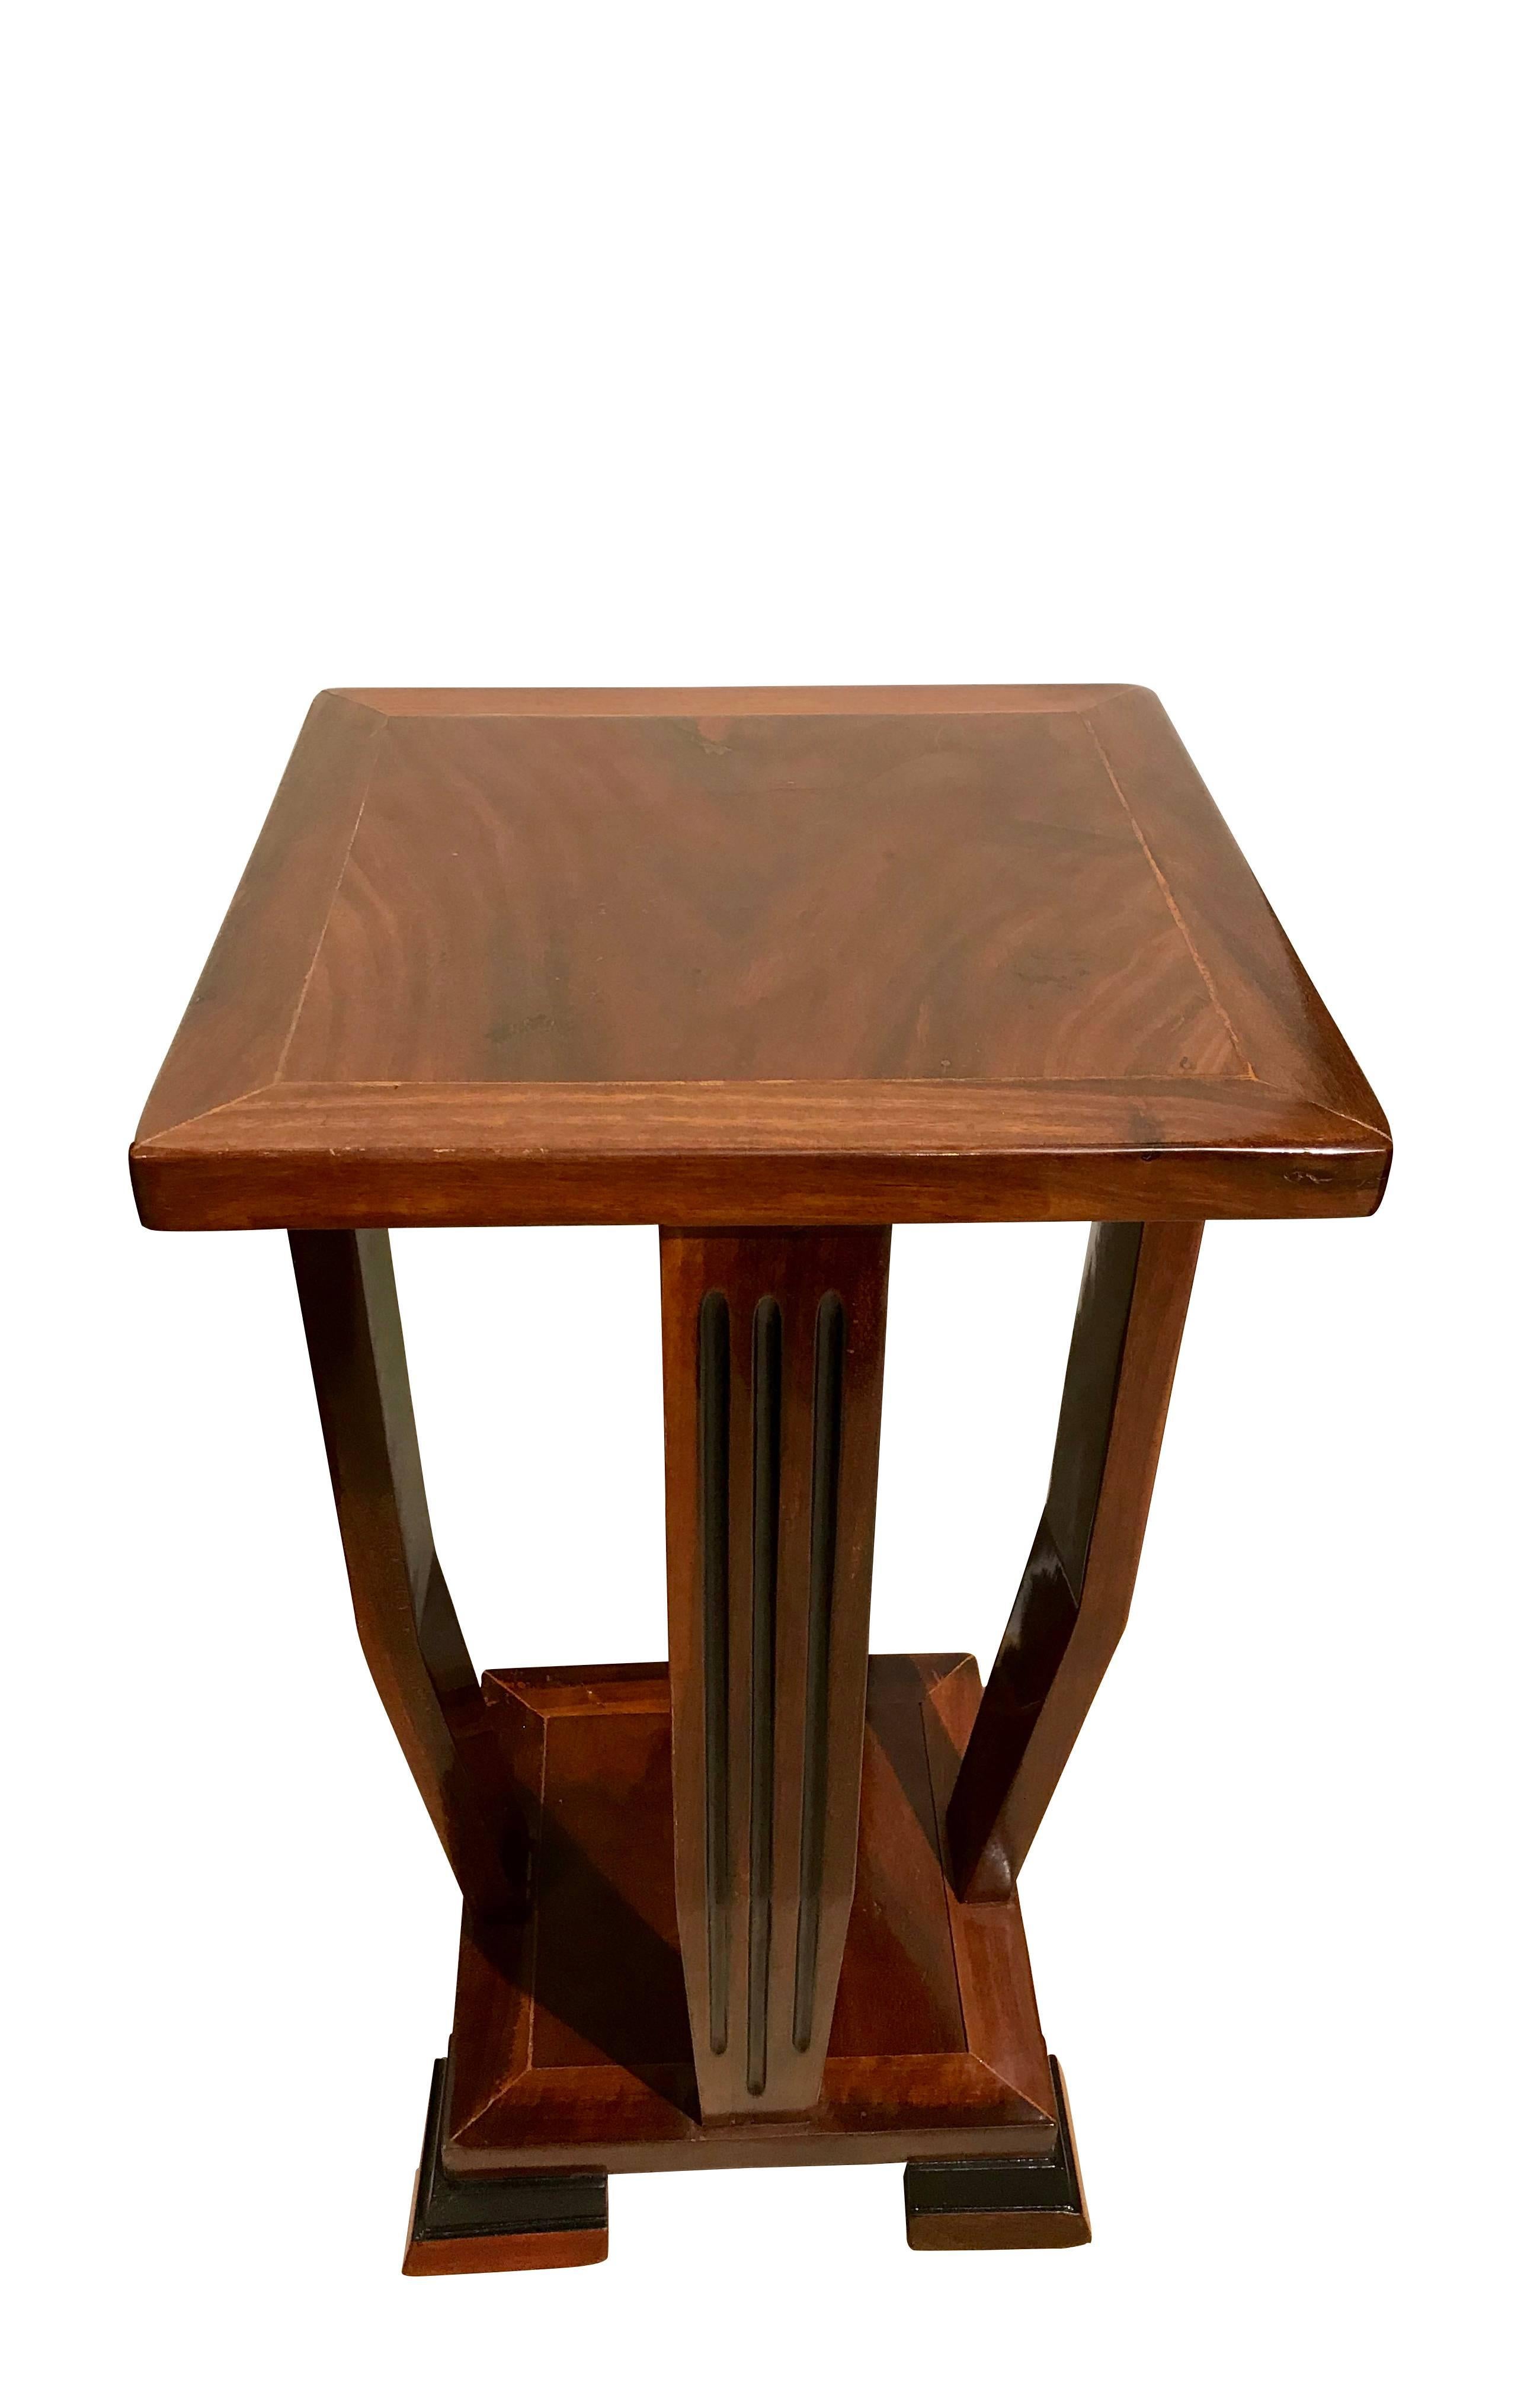 This very elegant Art Deco side-table is classic in its design and manufactured in very high quality. It has three blackened grooves in each of the four columns. The shellac hand-polish gives it a very precious high-gloss surface.